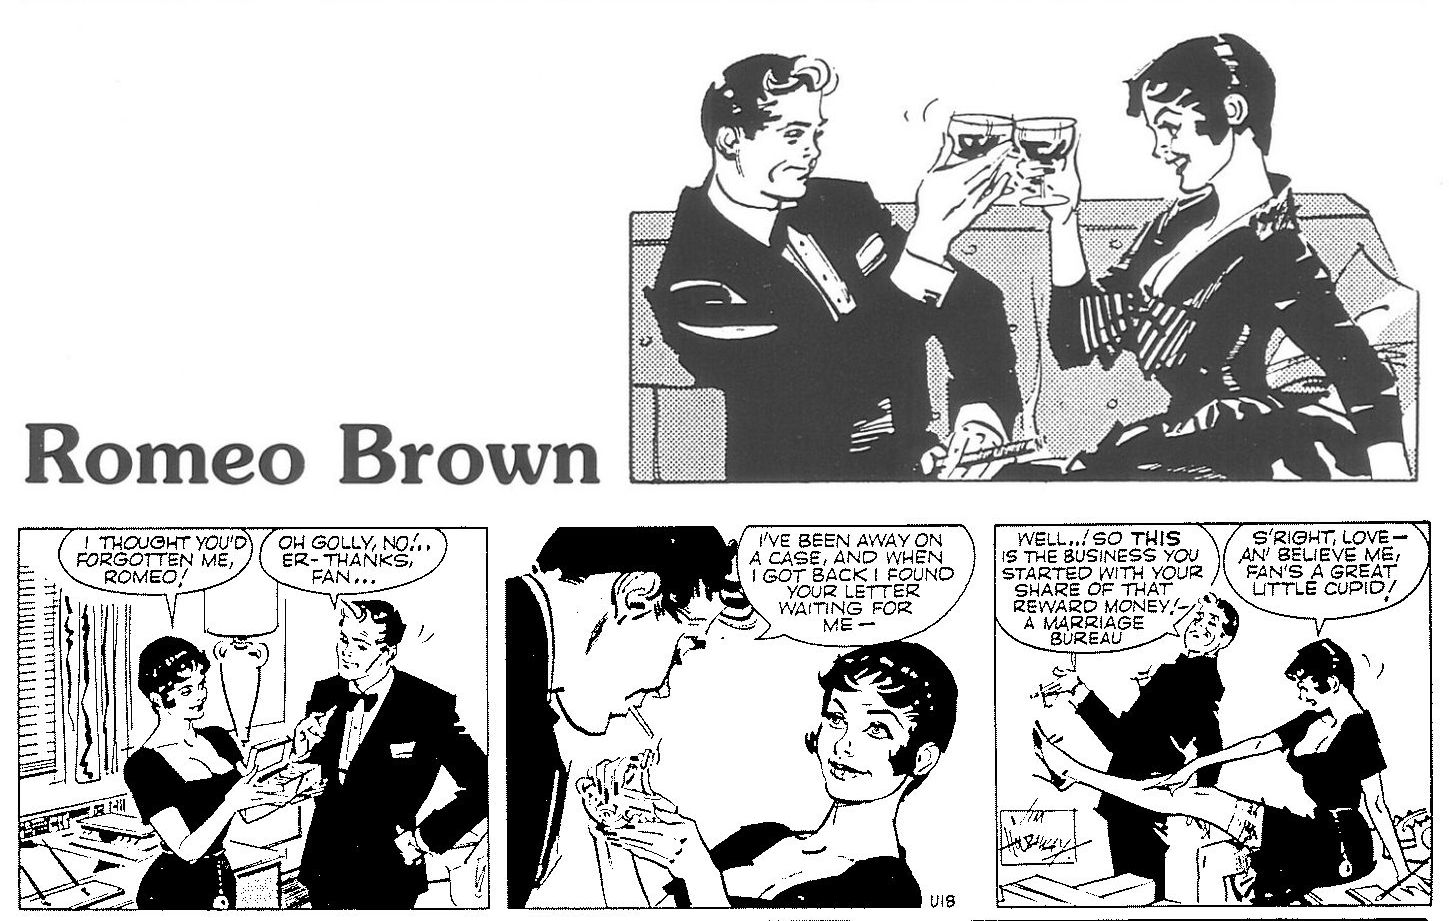 Romeo Brown (8 stories) - Mazure, Peter O'Donnell & Jim Holdaway